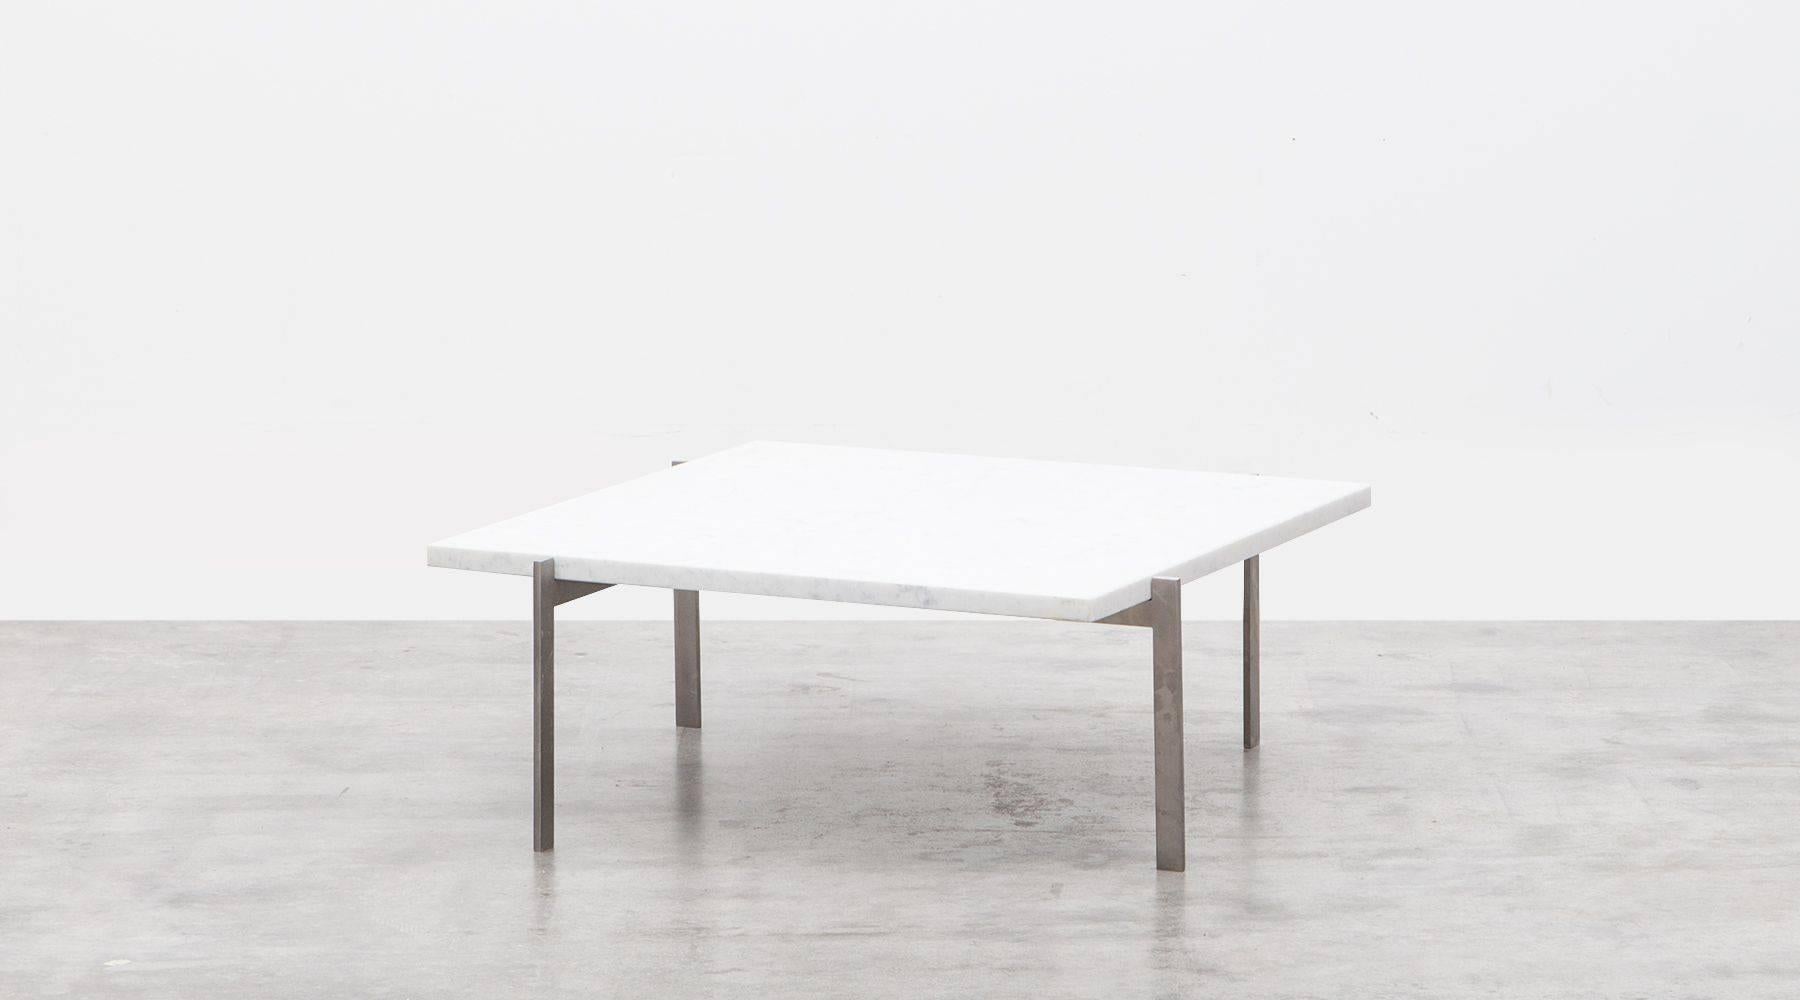 Nice large square coffee table designed by Danish Poul Kjaerholm in 1956. This table has a brushed matte chrome-plated steel frame and comes with a very nice white marble top that is in good condition with minimal wear due to use and age. Very nice